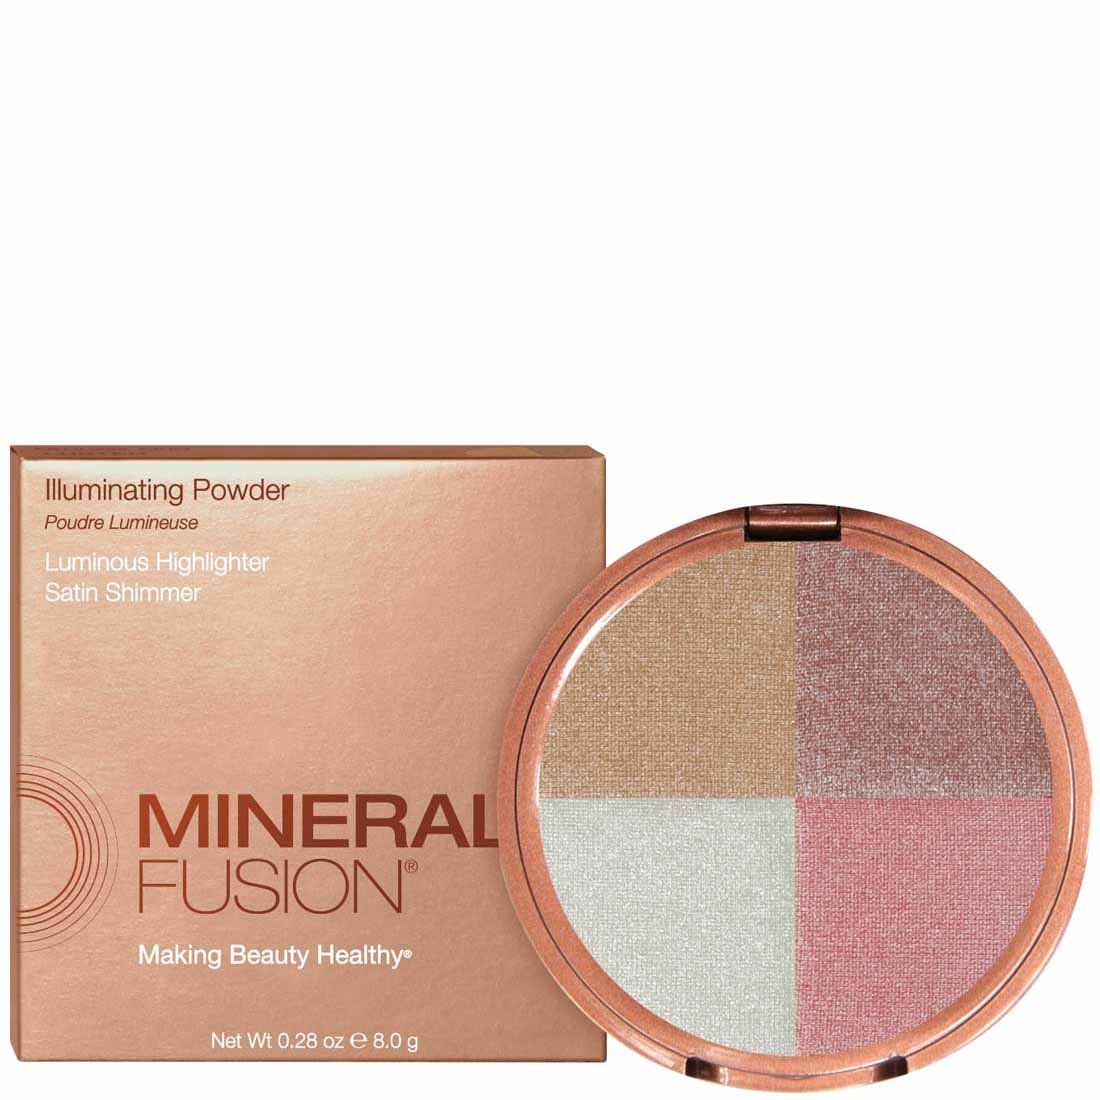 Mineral Fusion Illuminating Powder, 7.9g, Clearance 35% Off, Final Sale